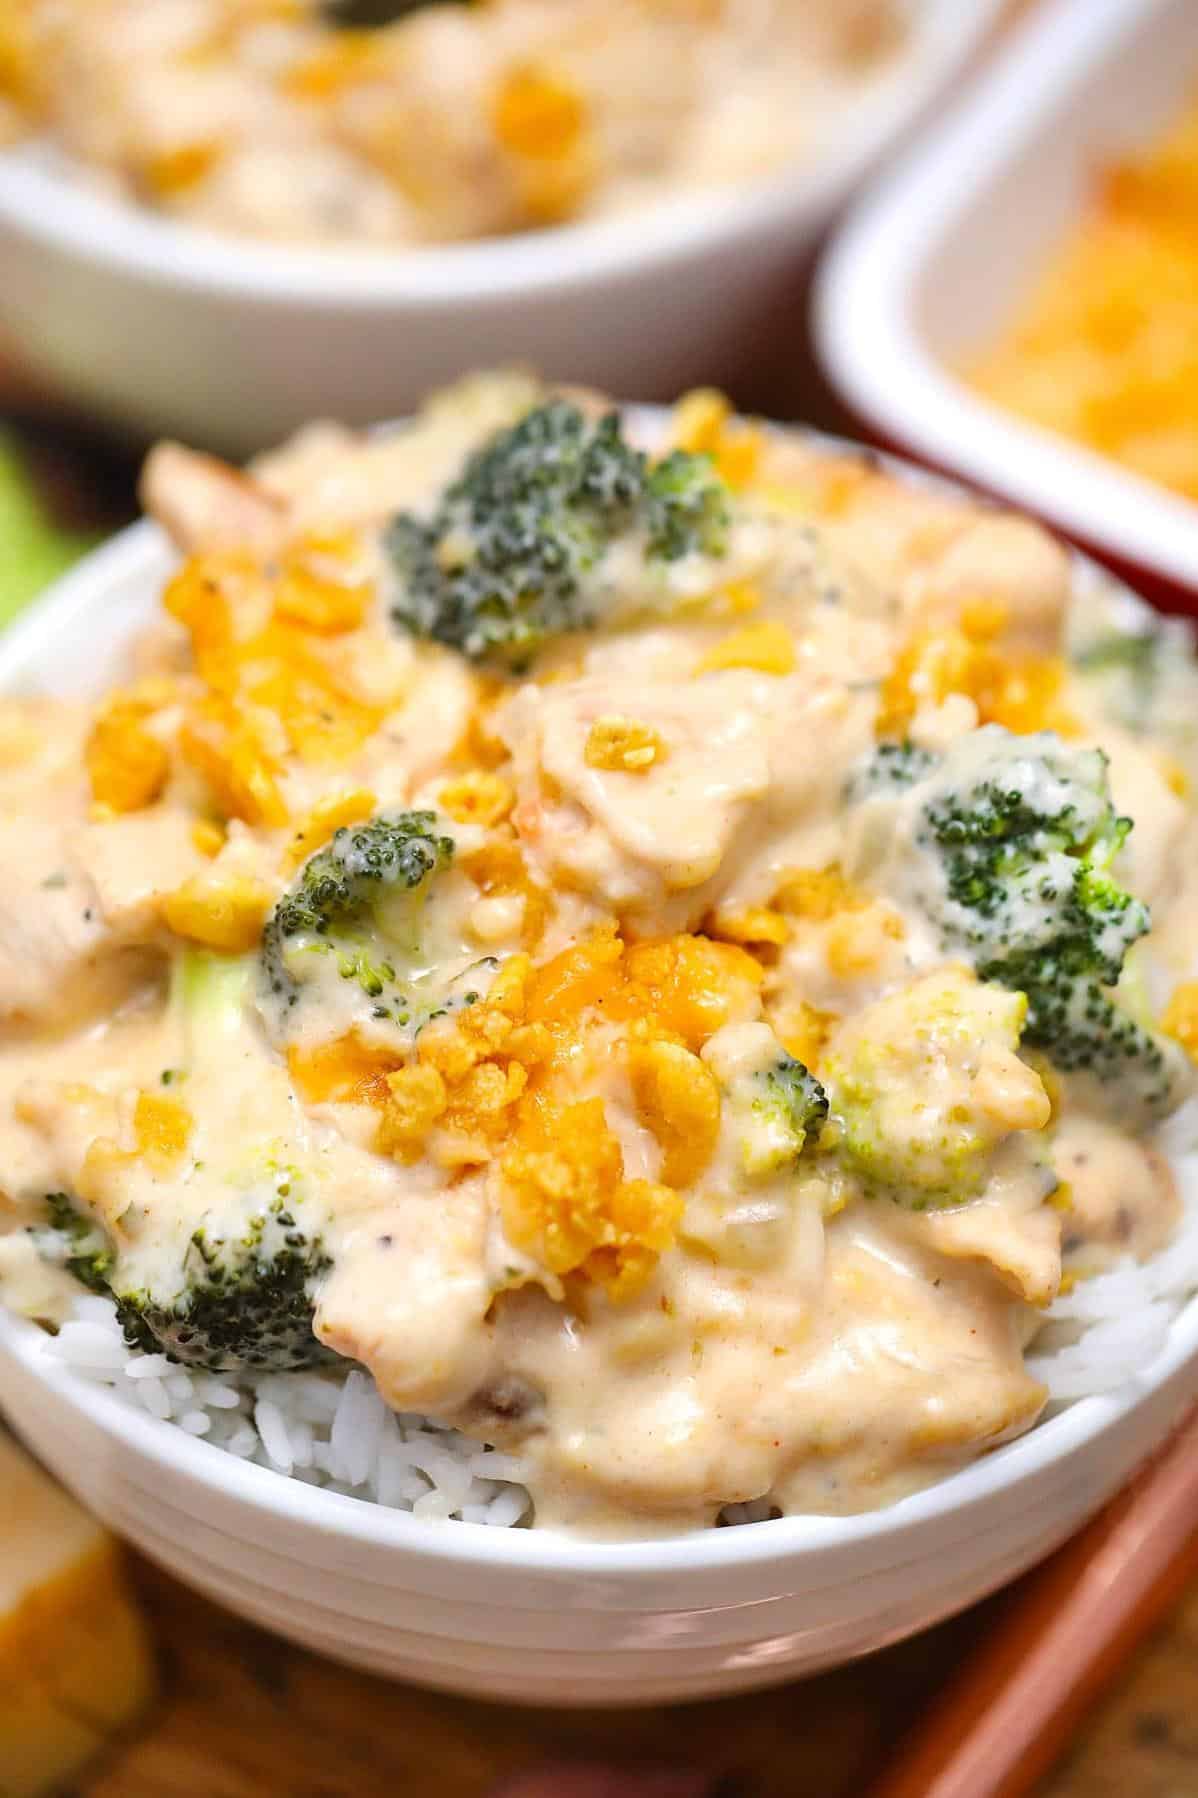  Deliciously tender chicken smothered in a luxurious cheese sauce, what more could you ask for?